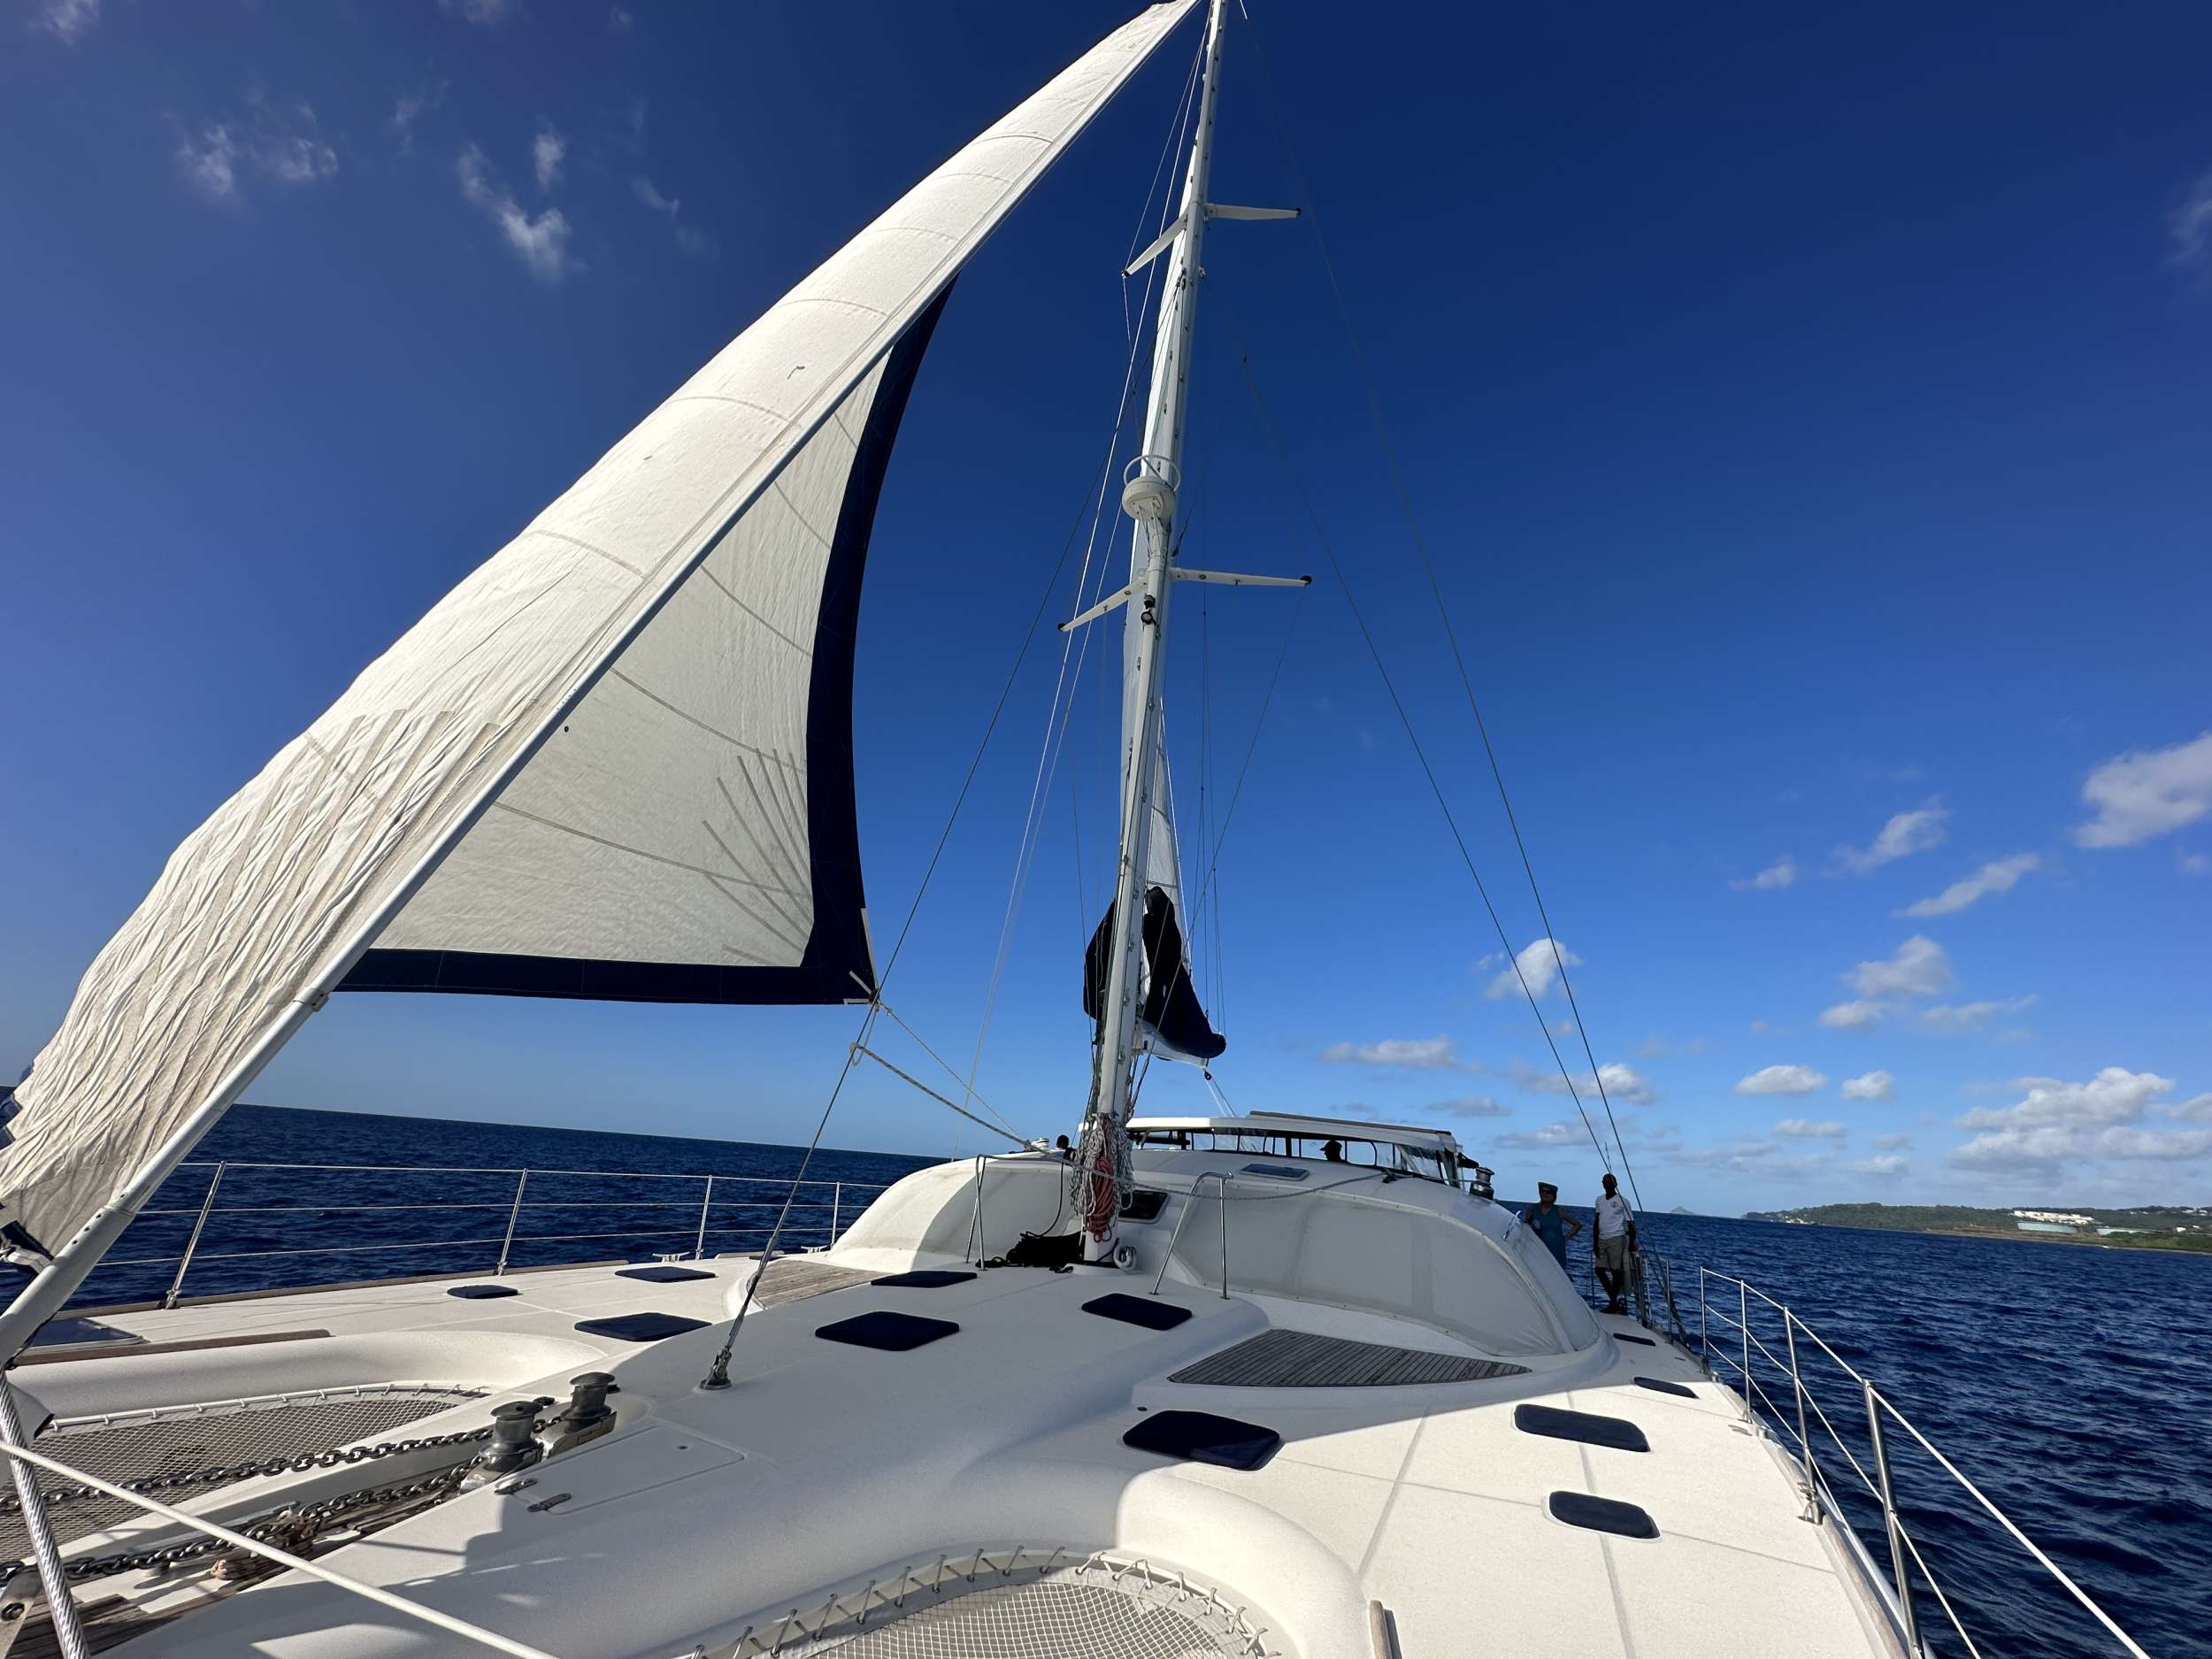 Lady Marigot - Yacht Charter Guadeloupe & Boat hire in Caribbean 1